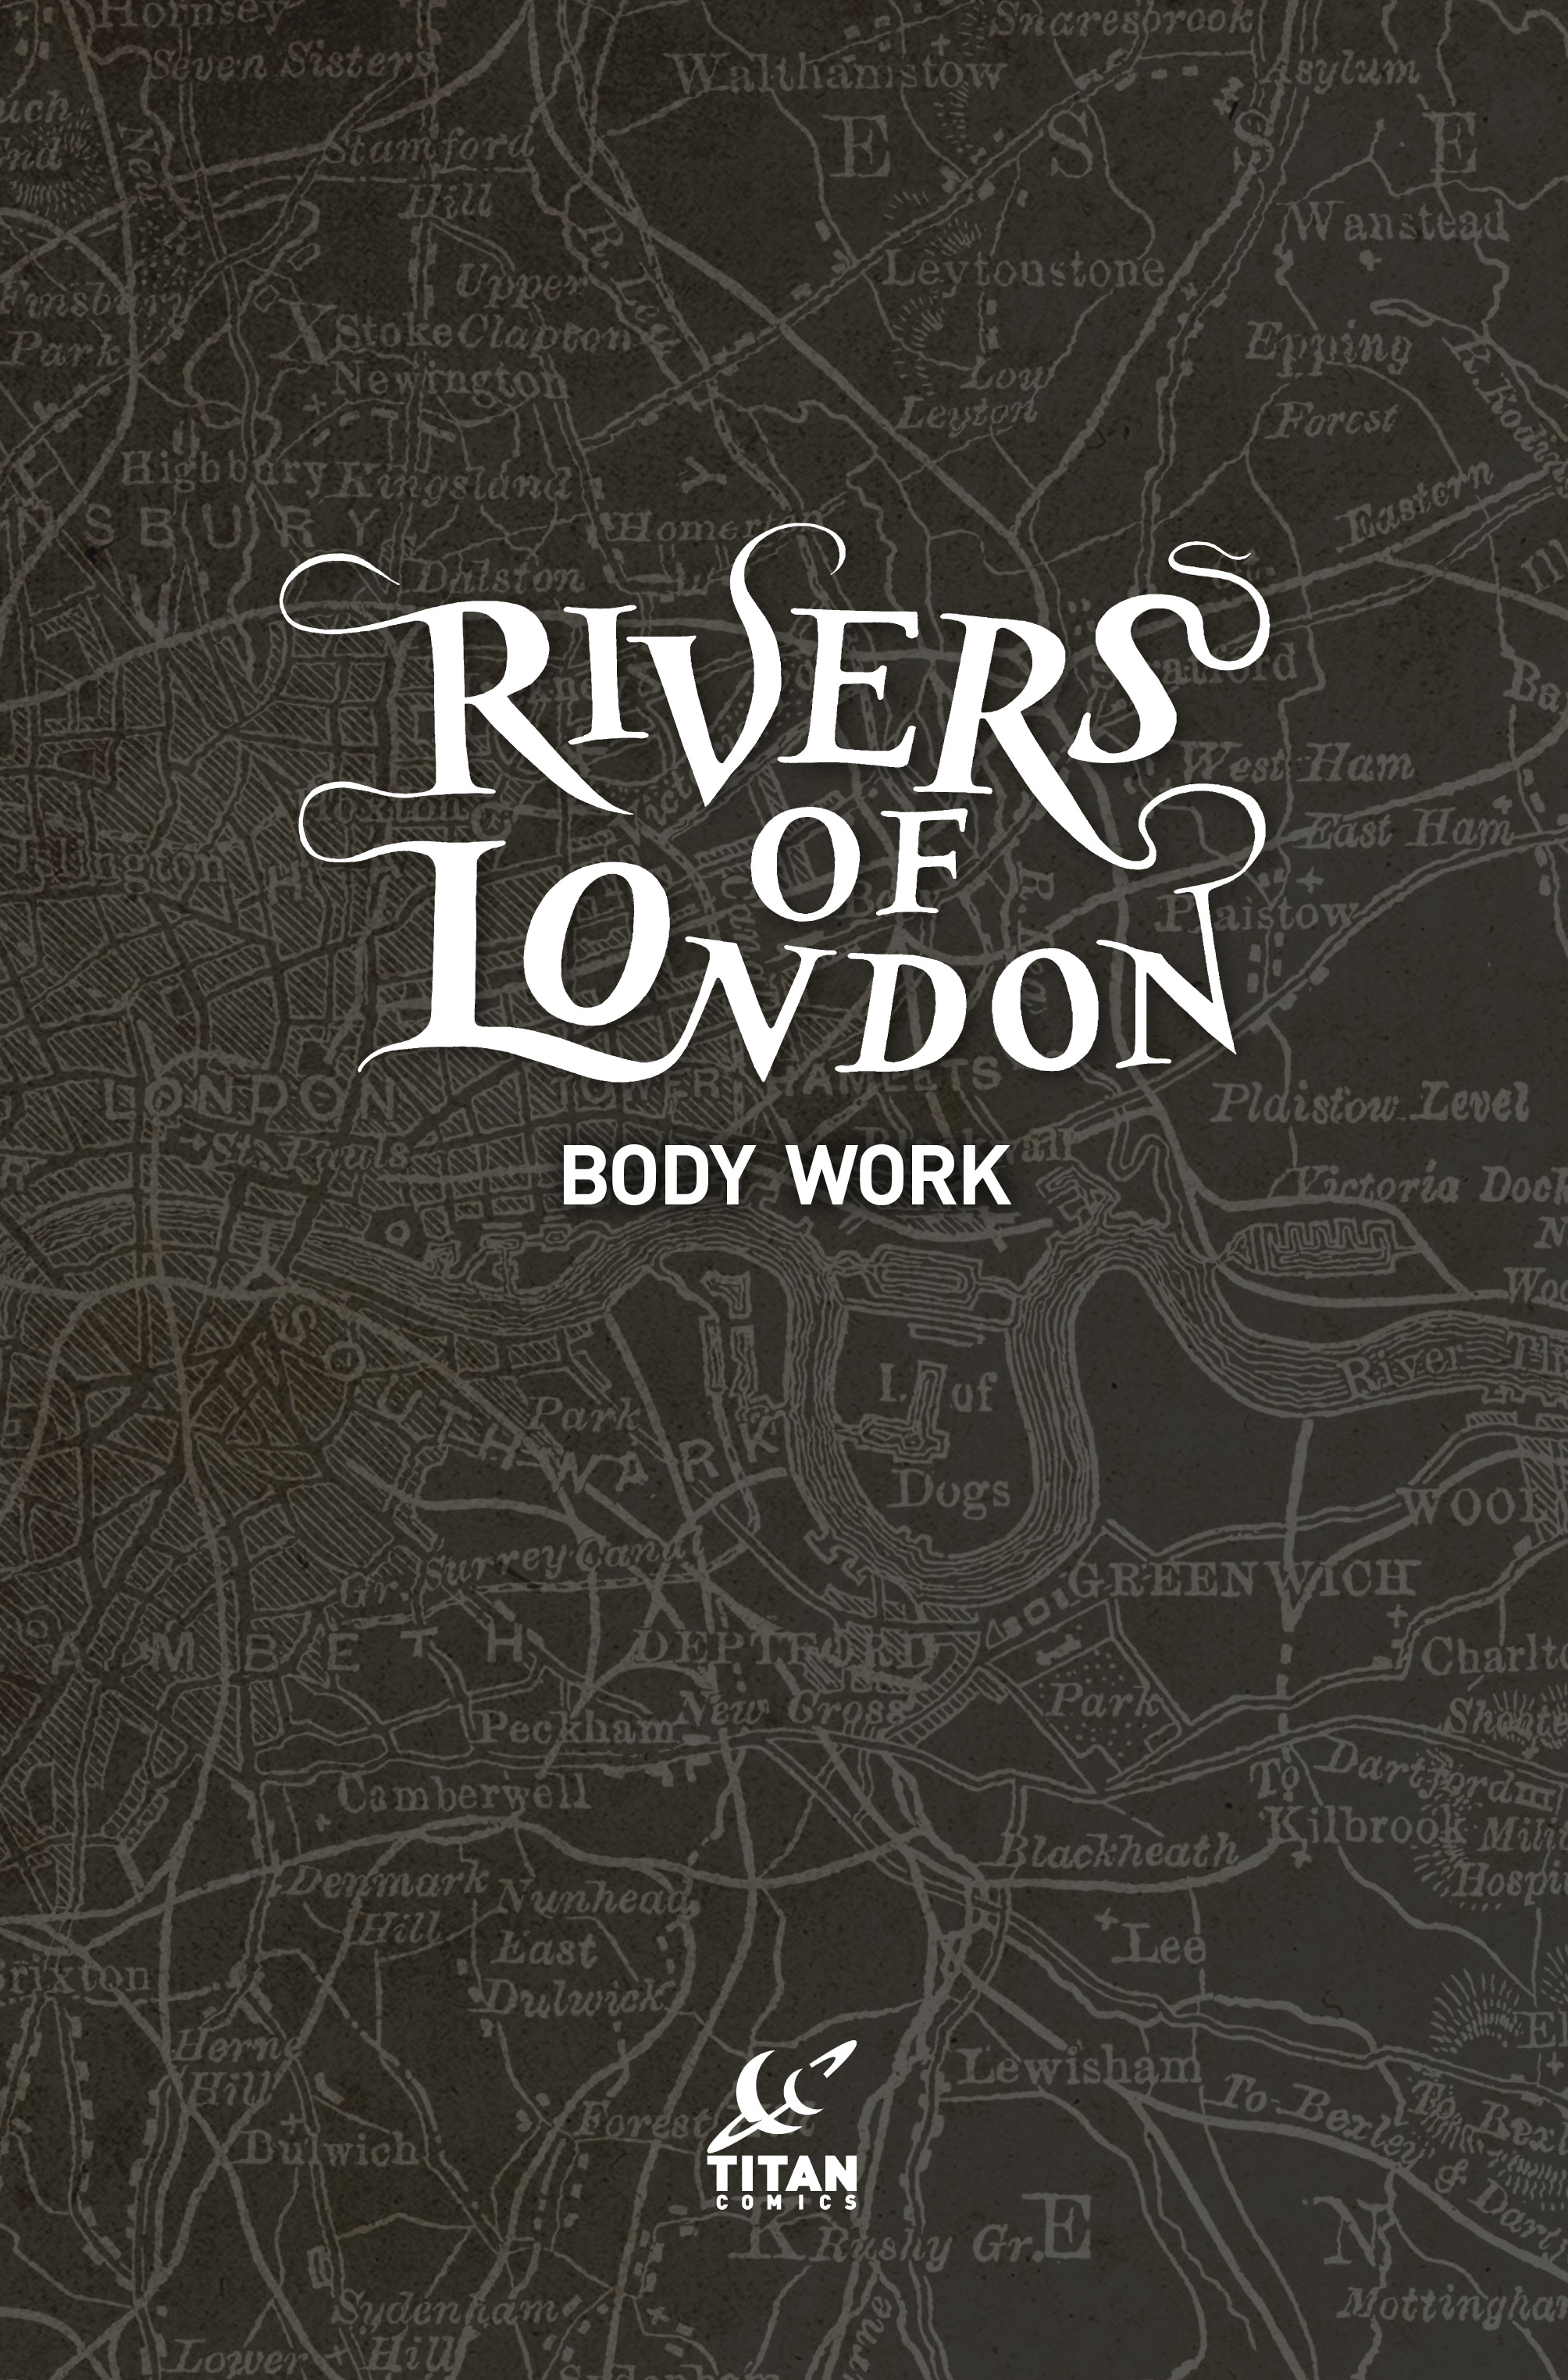 Read online Rivers of London: Body Work comic -  Issue # TPB - 2